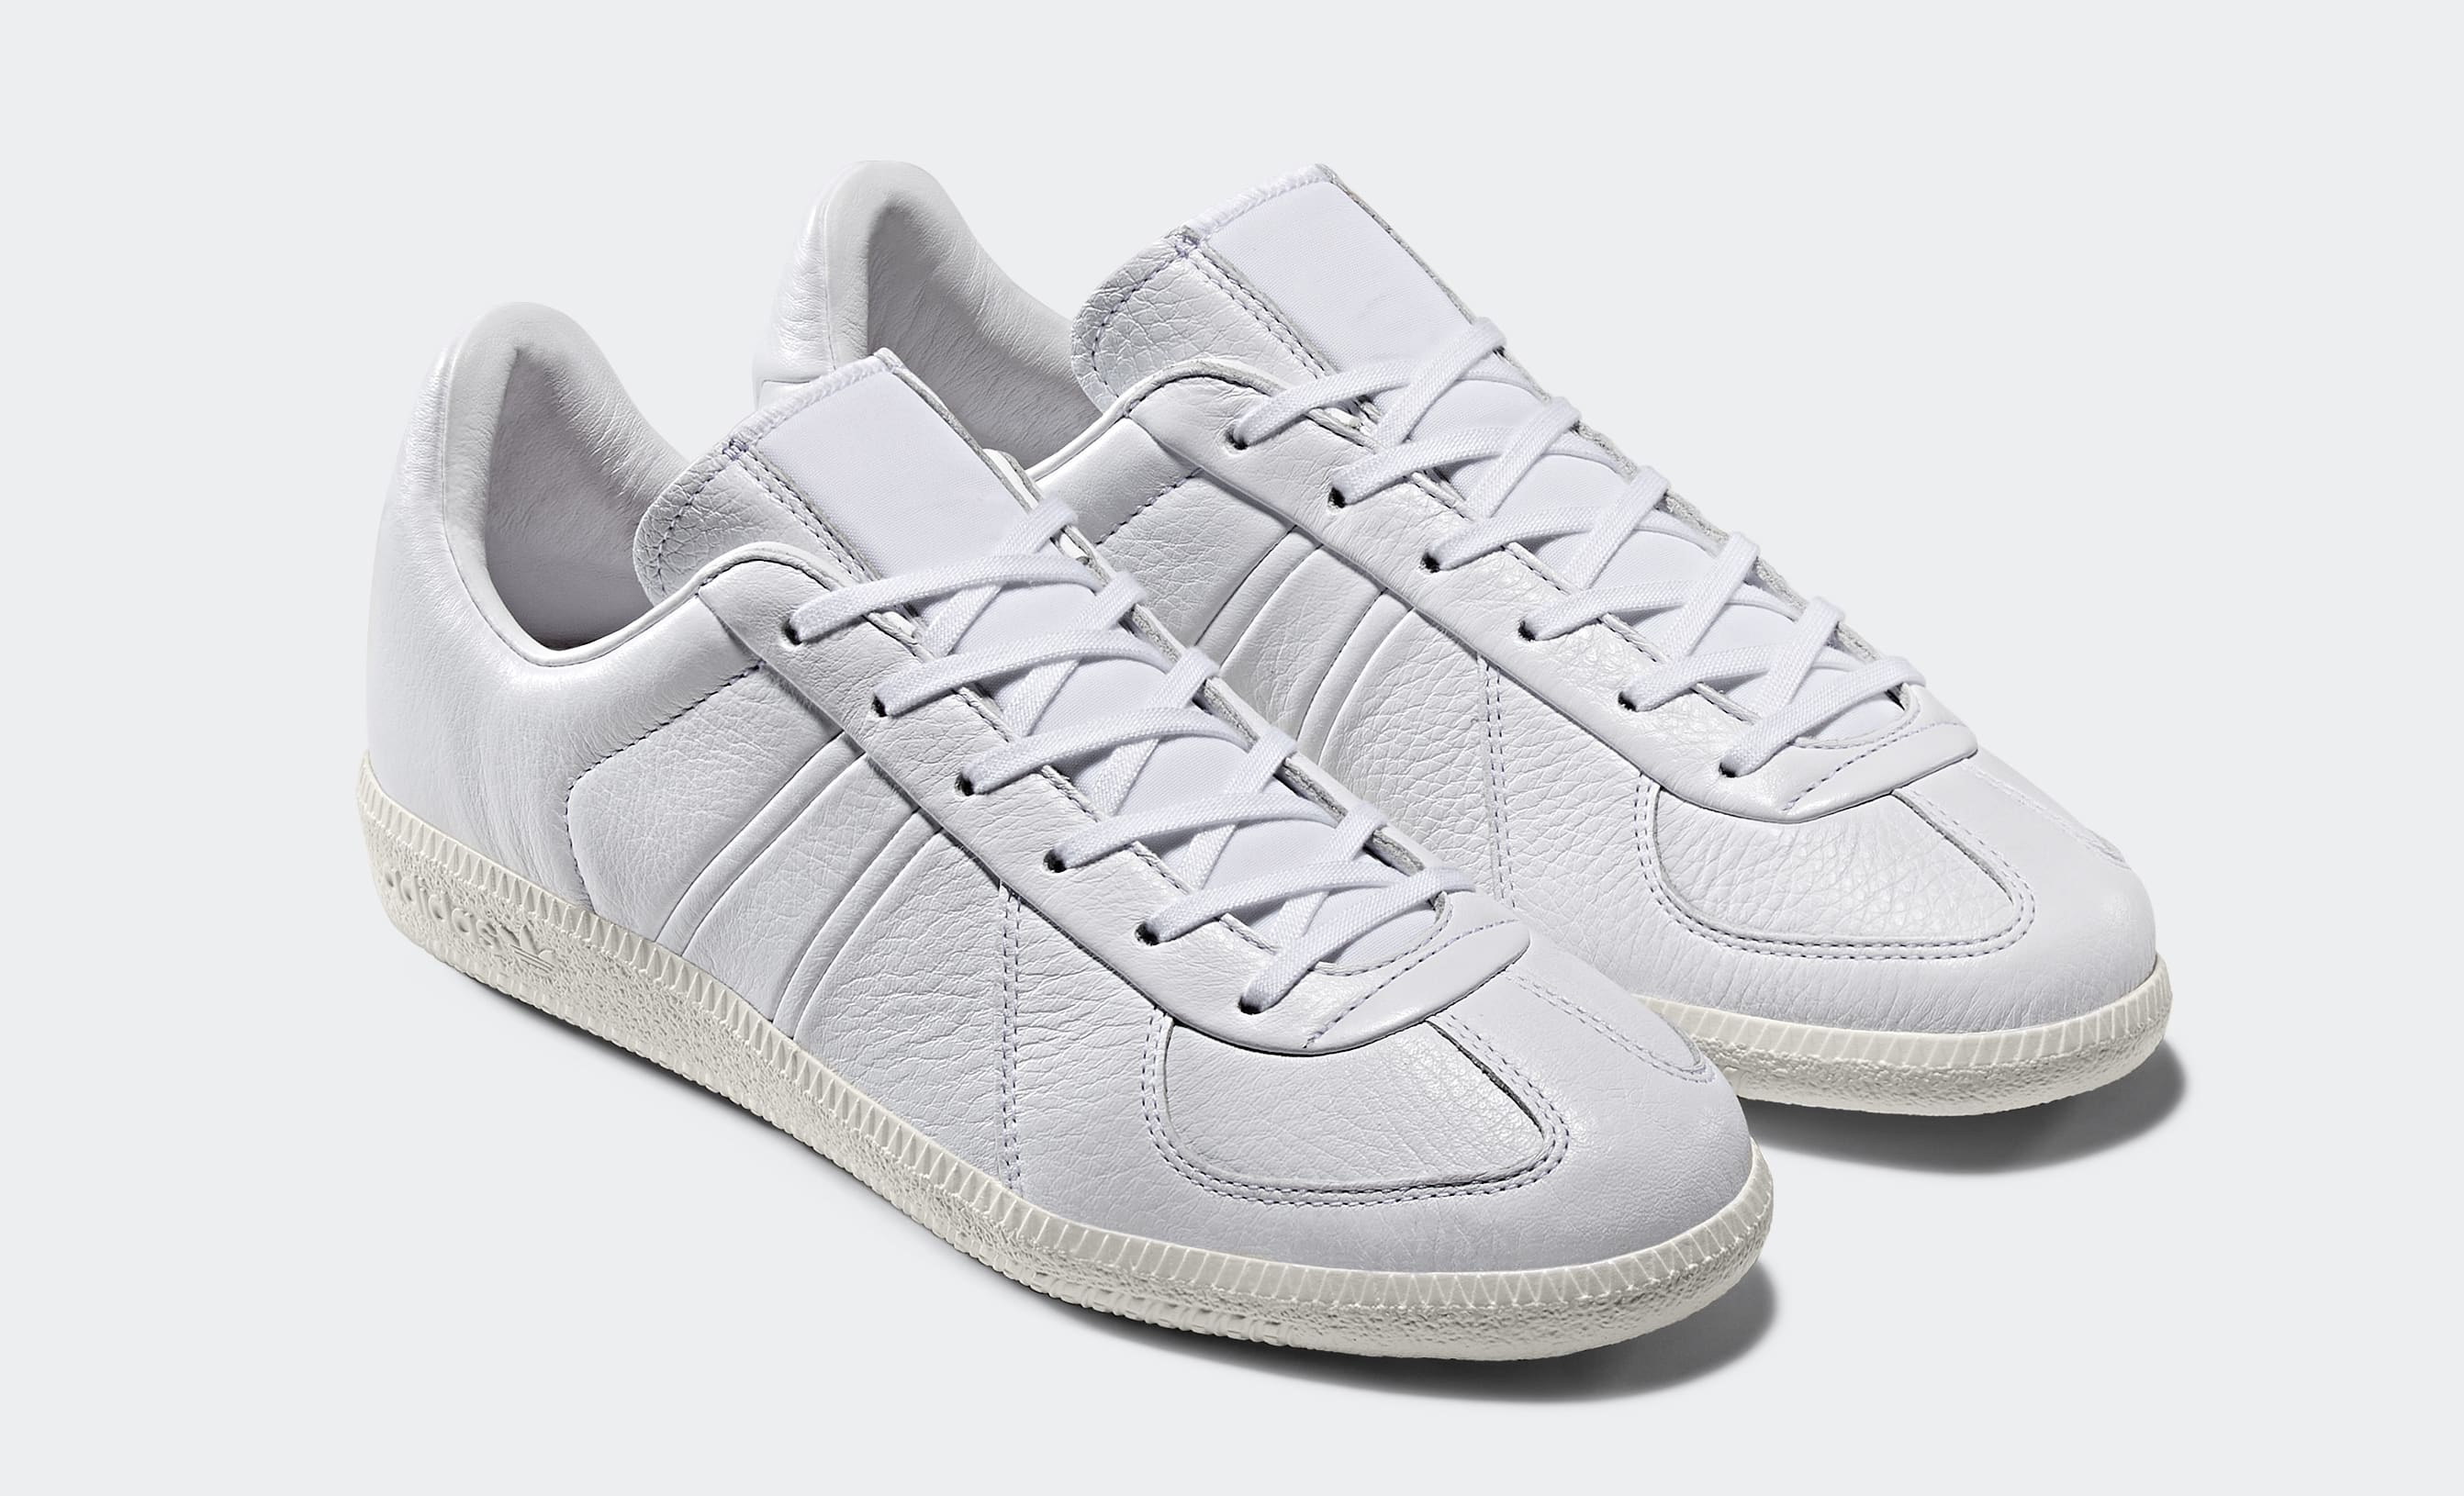 Oyster Holdings x Adidas BW Army BC0545 (Pair)